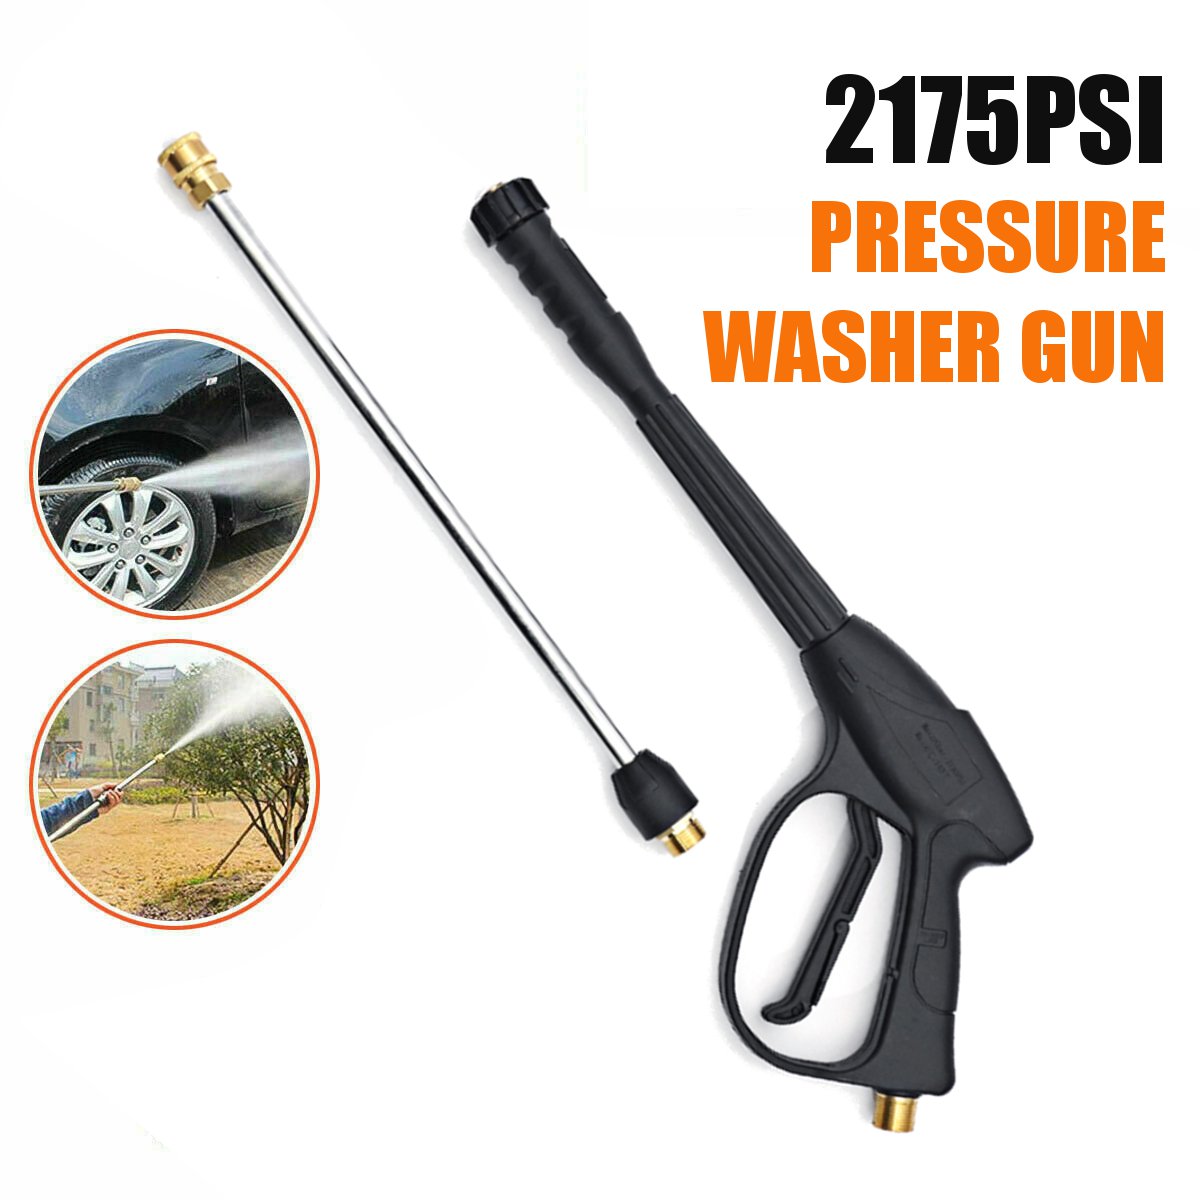 2175PSI-High-Pressure-Sprayer-Accessories-Car-Power-Washer-Wand-Nozzle-Tips-Hose-Kits-1607761-1